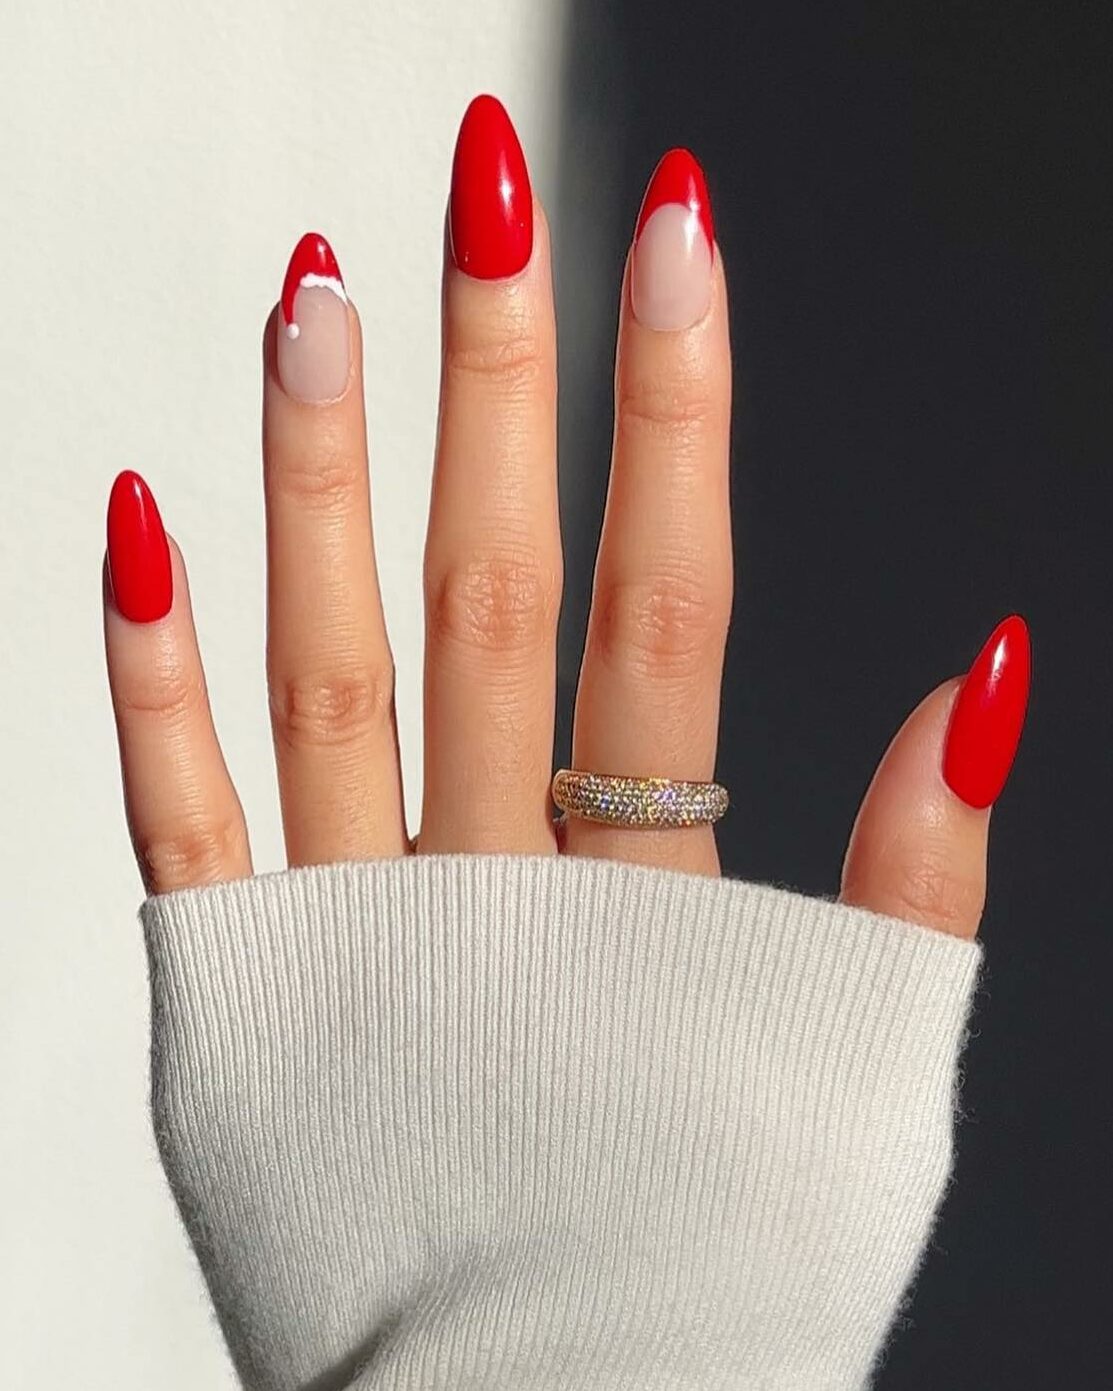 Red Nails with a Playful Santa Hat Design